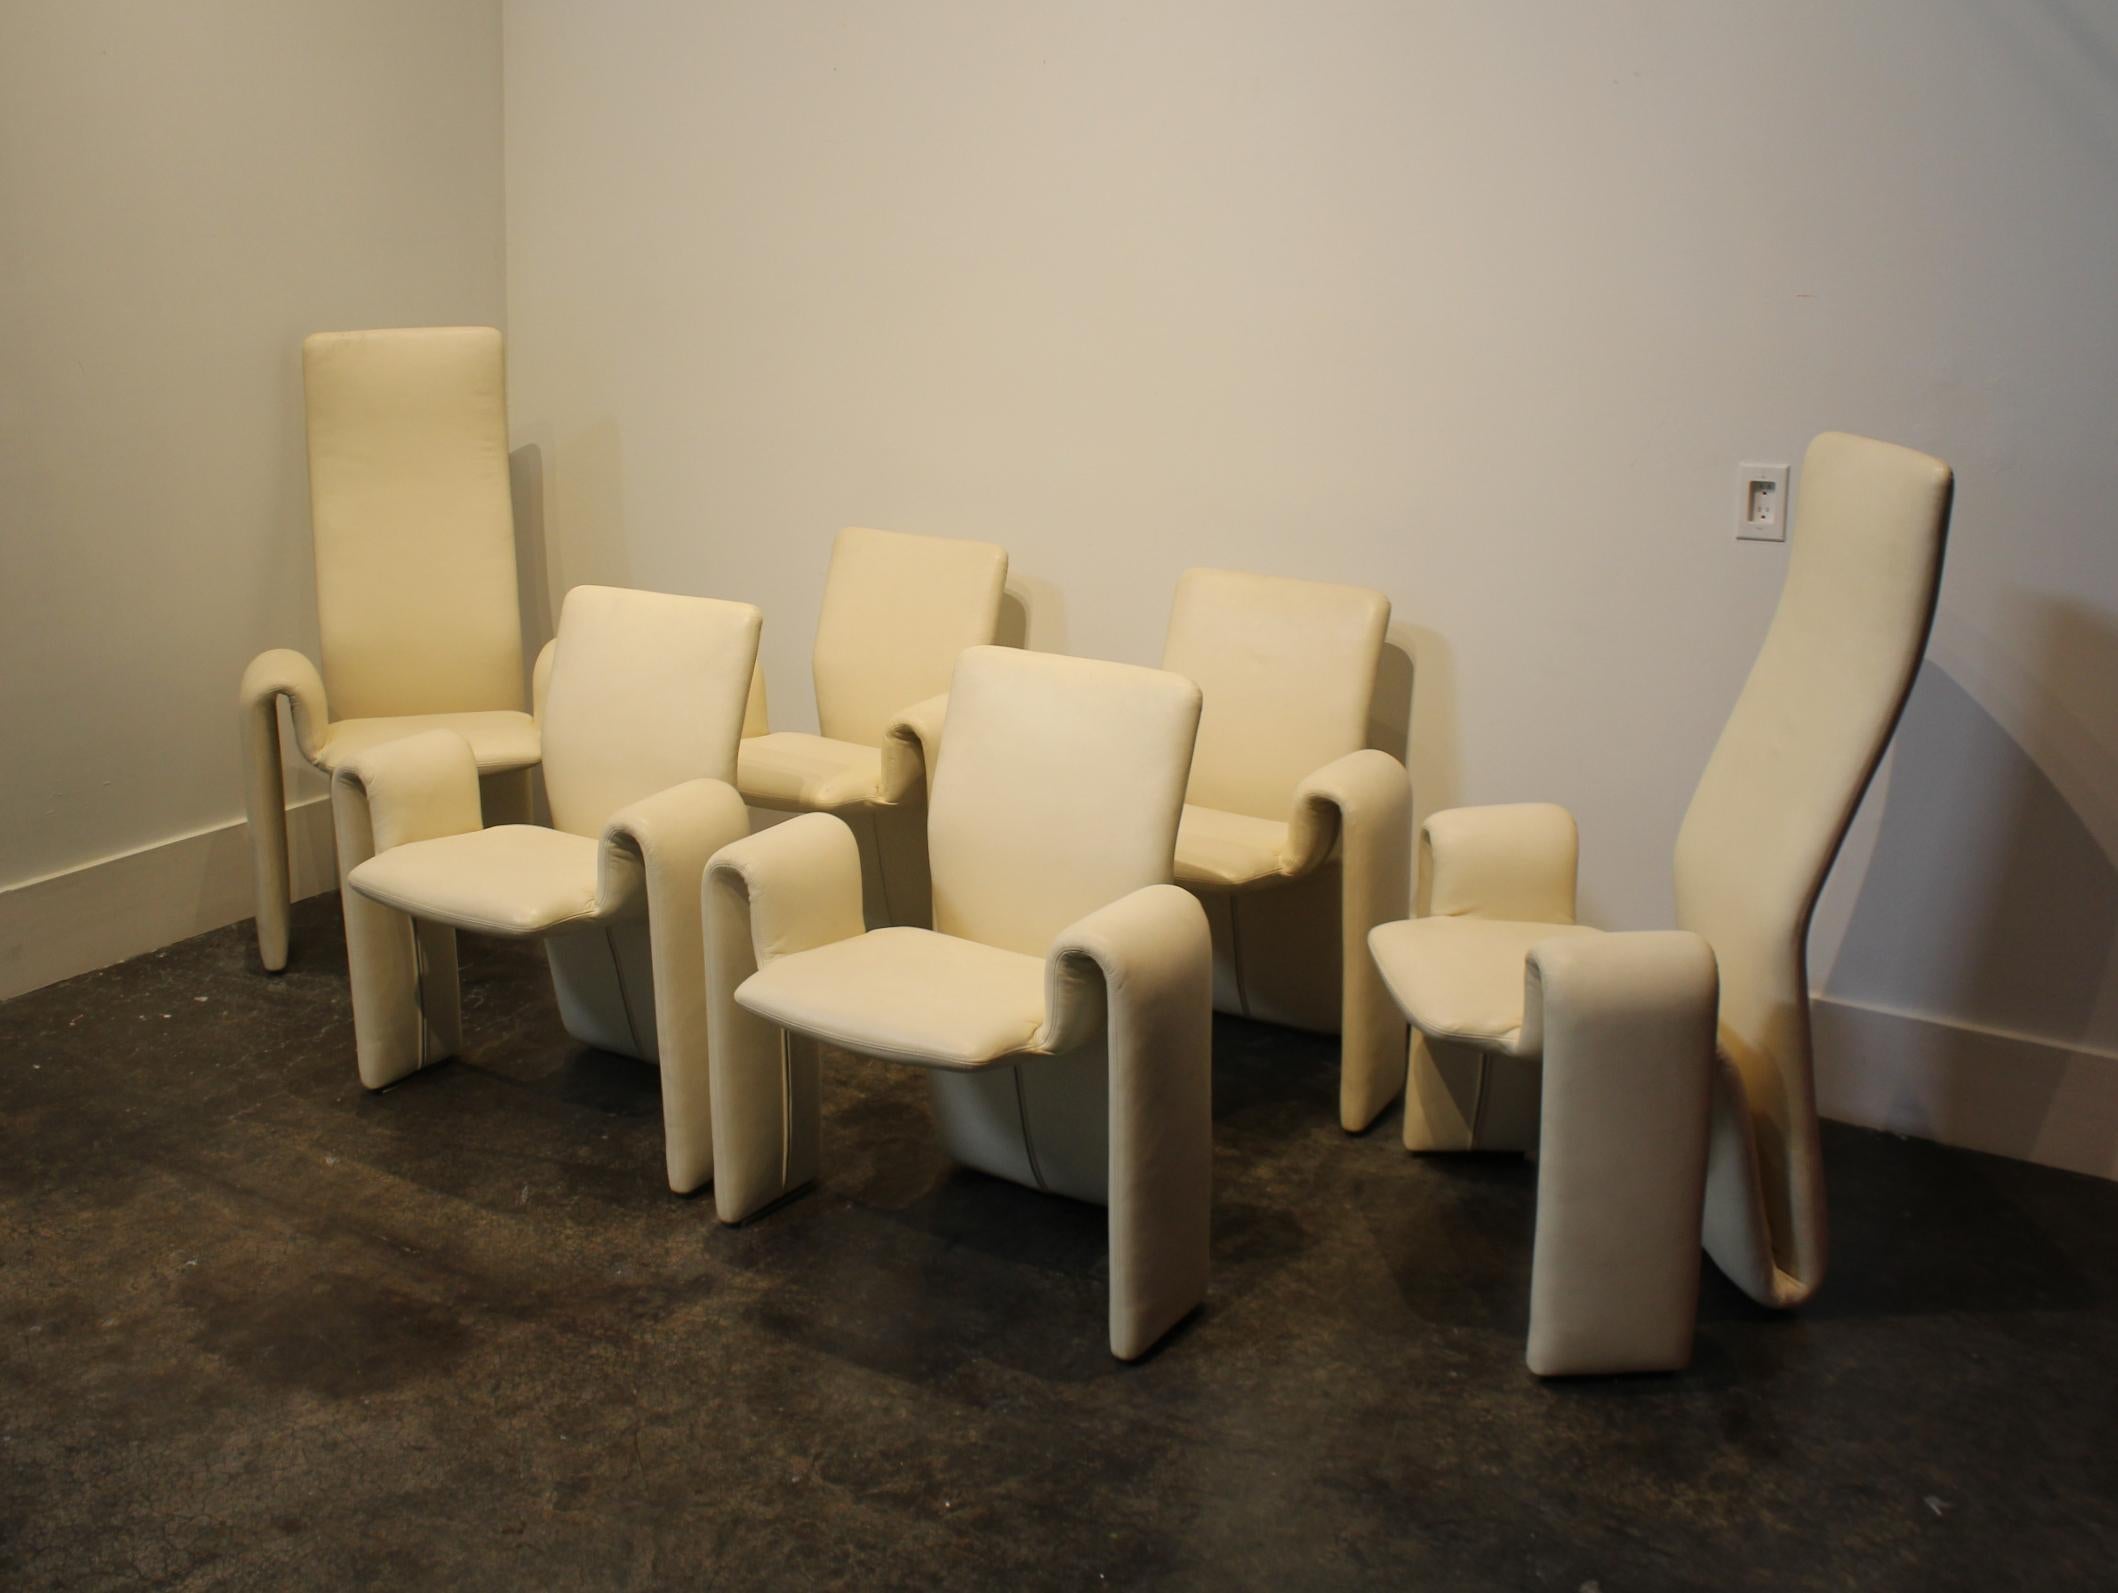 A rare six-piece set of off-white dining chairs designed by Steve Leonard for Brayton International in the 1970s. Sinuous shape is evocative of the futuristic designs of Olivier Mourgue or Pierre Paulin. Back has a bit of flex to it, making it a